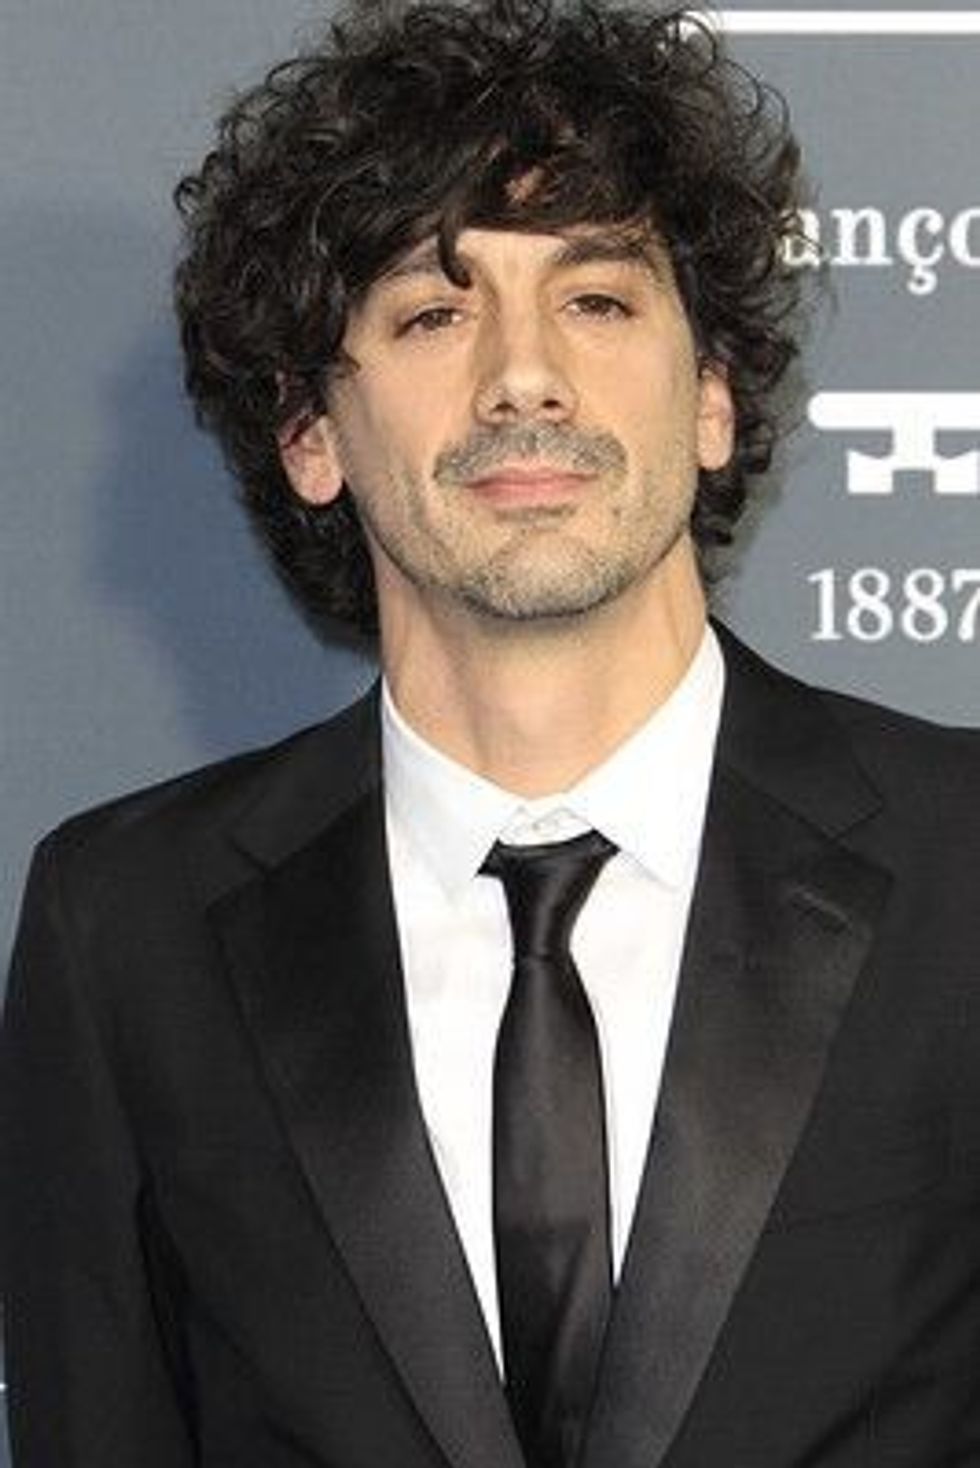 Anthony Rossomando was introduced to the band Libertines by Isaac Green of Columbia Records.